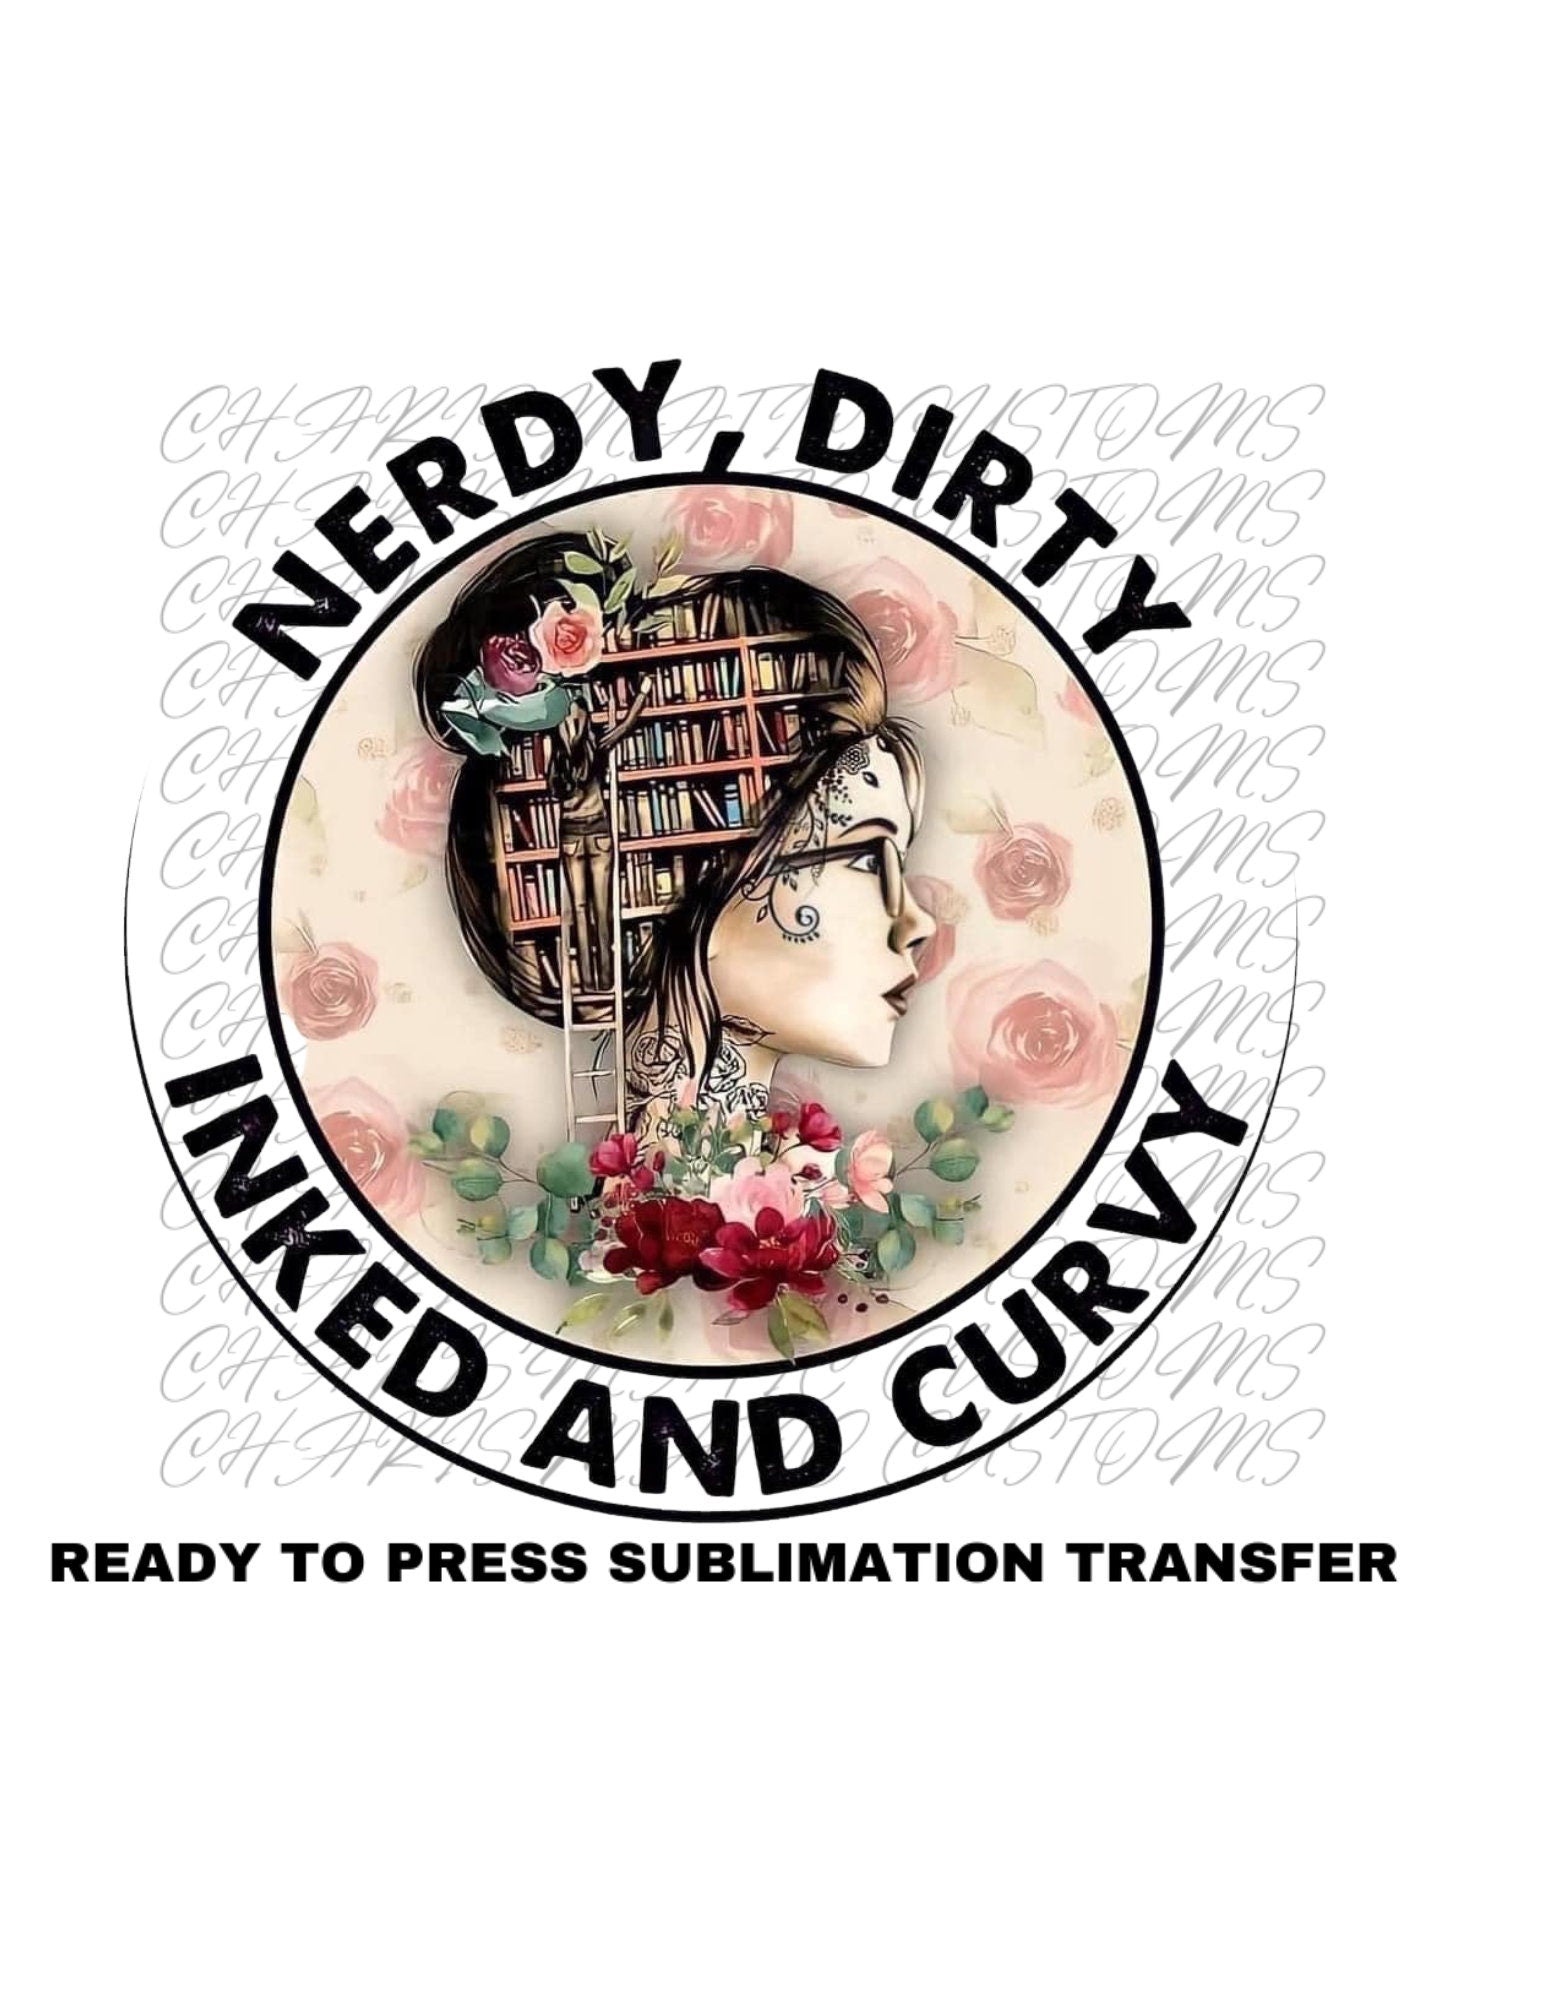 Nerdy Dirty Inked and Curvy Ready to Press Sublimation Print Transfer